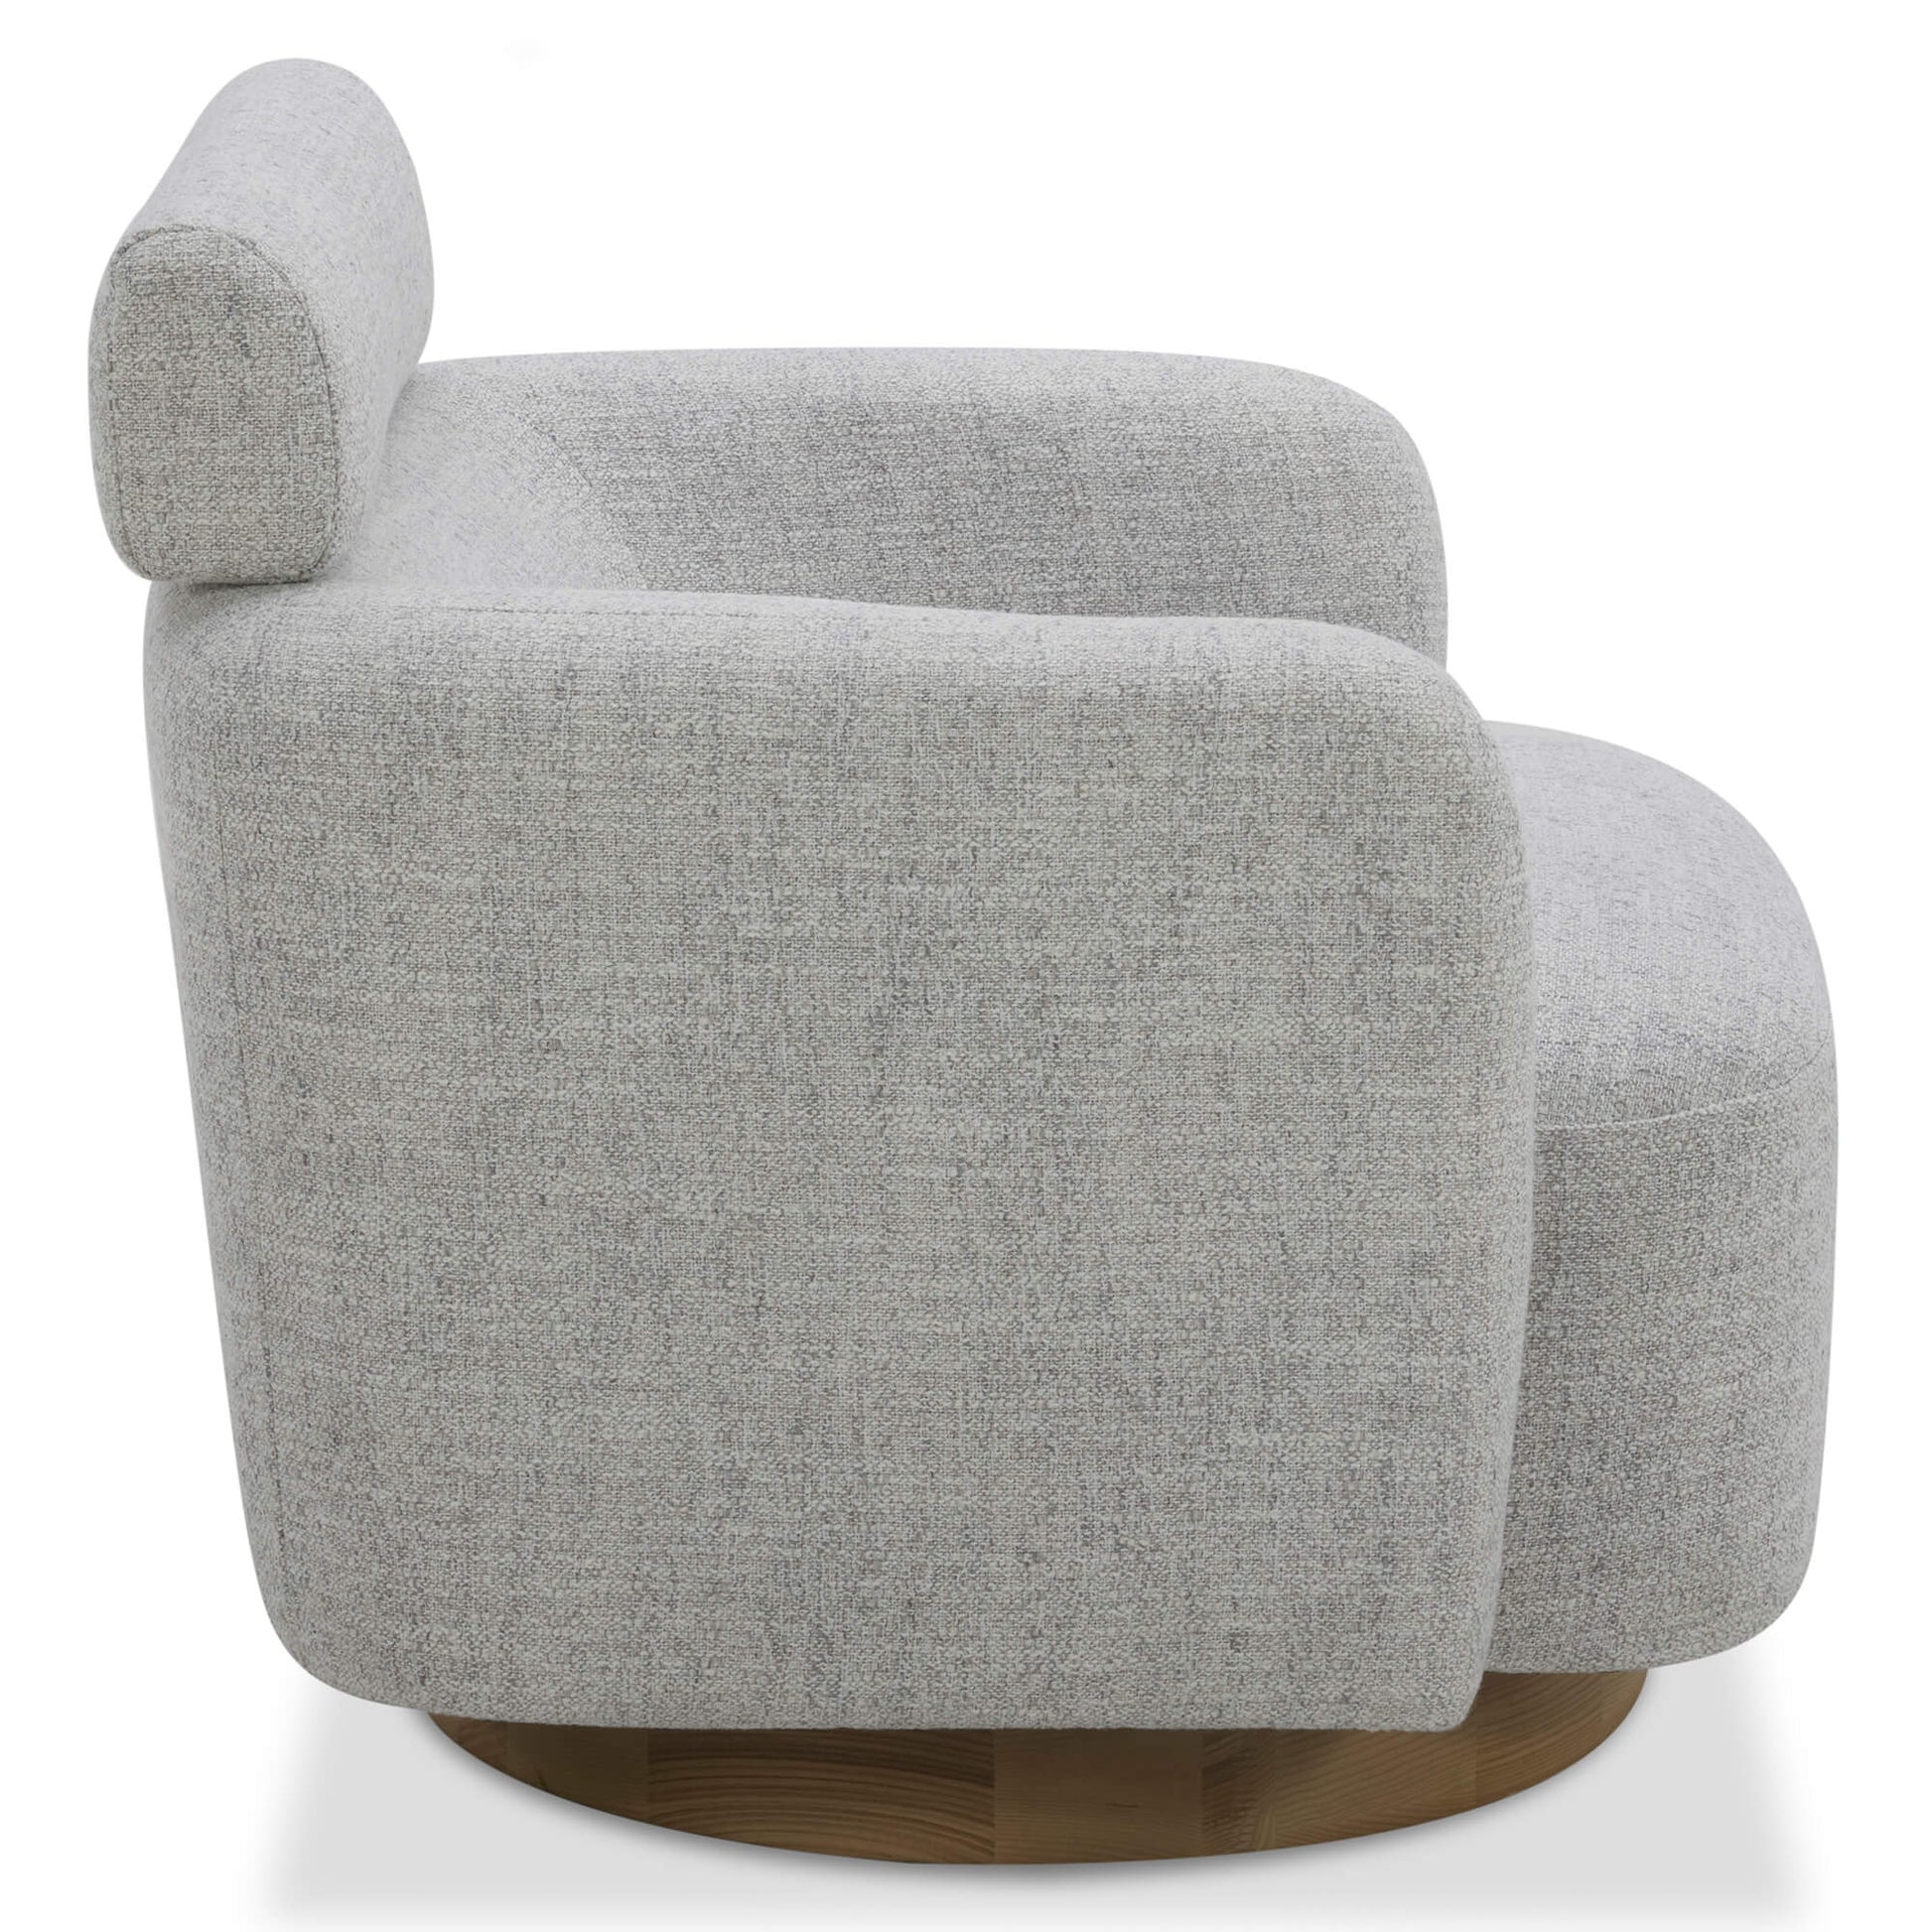 CHITA LIVING-Luna Swivel Accent Chair With Adjustable Backrest-Accent Chair-Fabric-Mixed White-